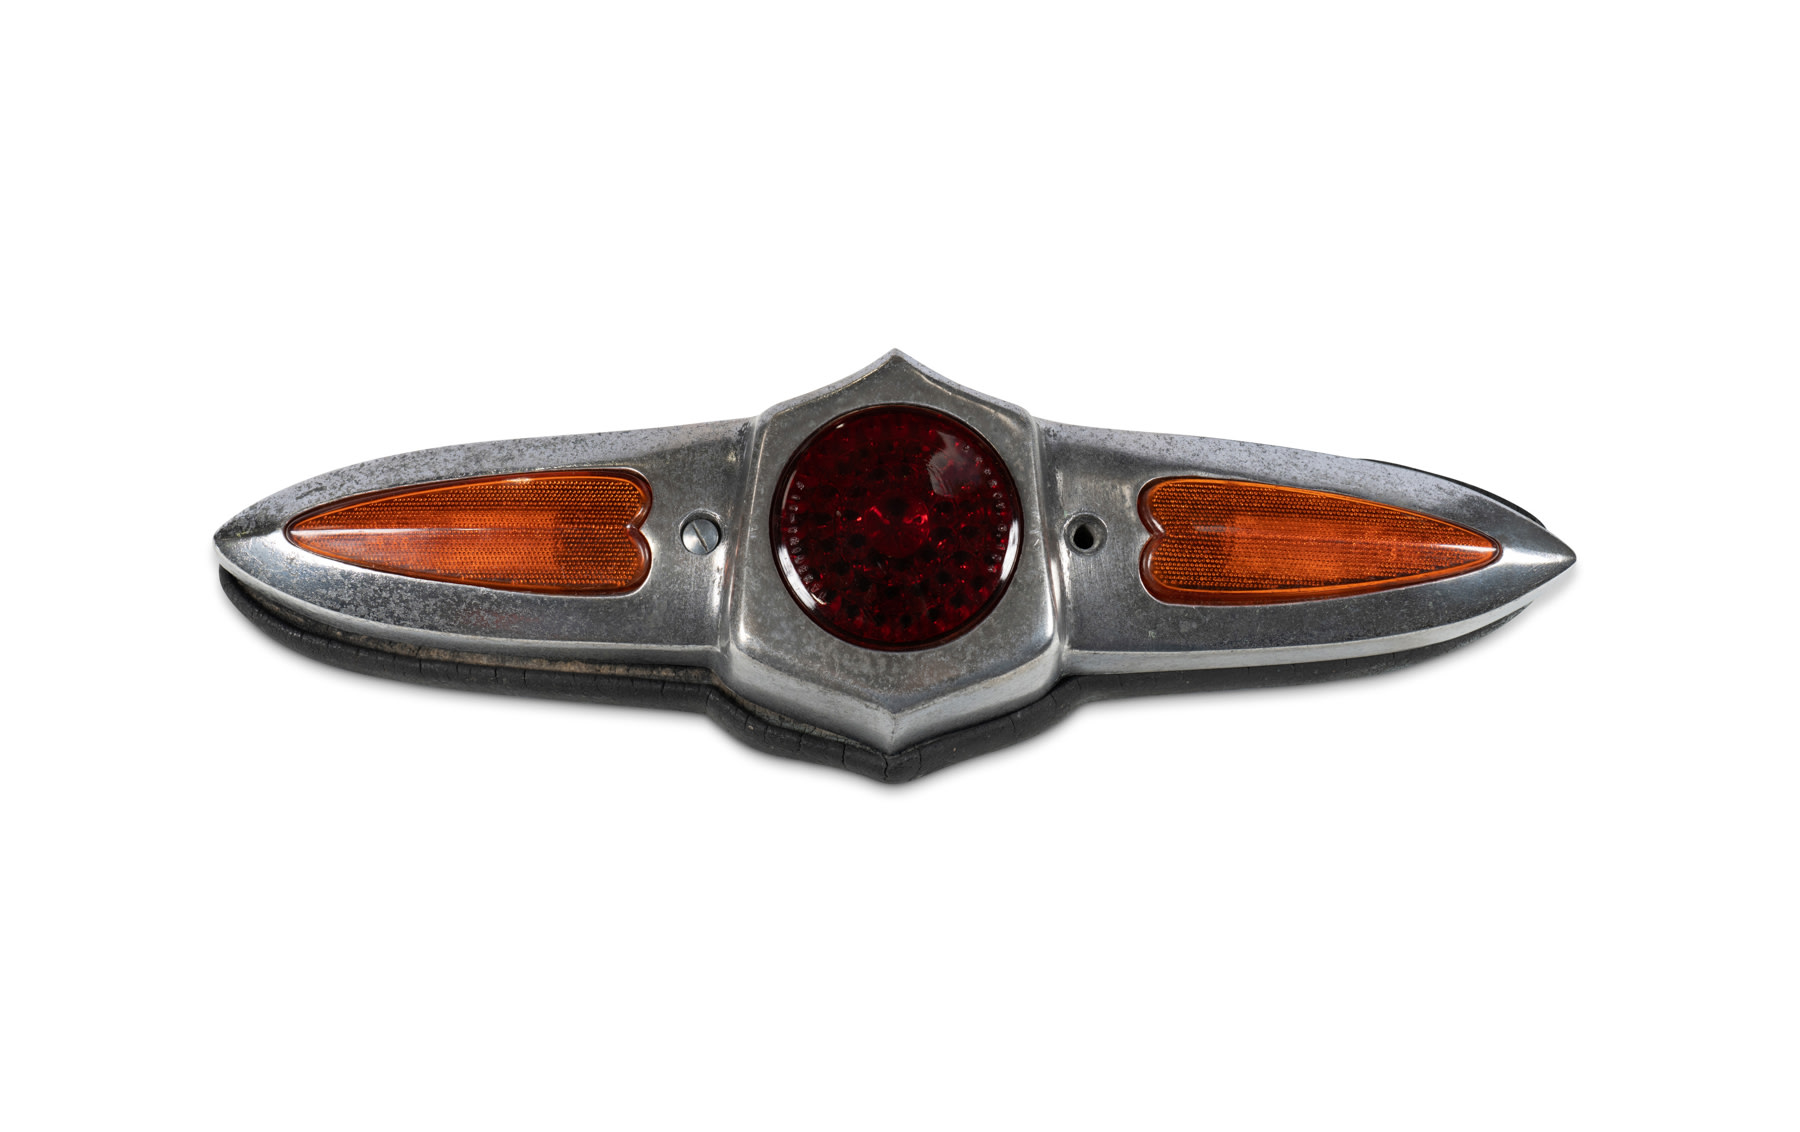 Fit-Triberti Rear Stop Light Turn Signal and License Plate Lamp, c. late 1940s/early 1950s